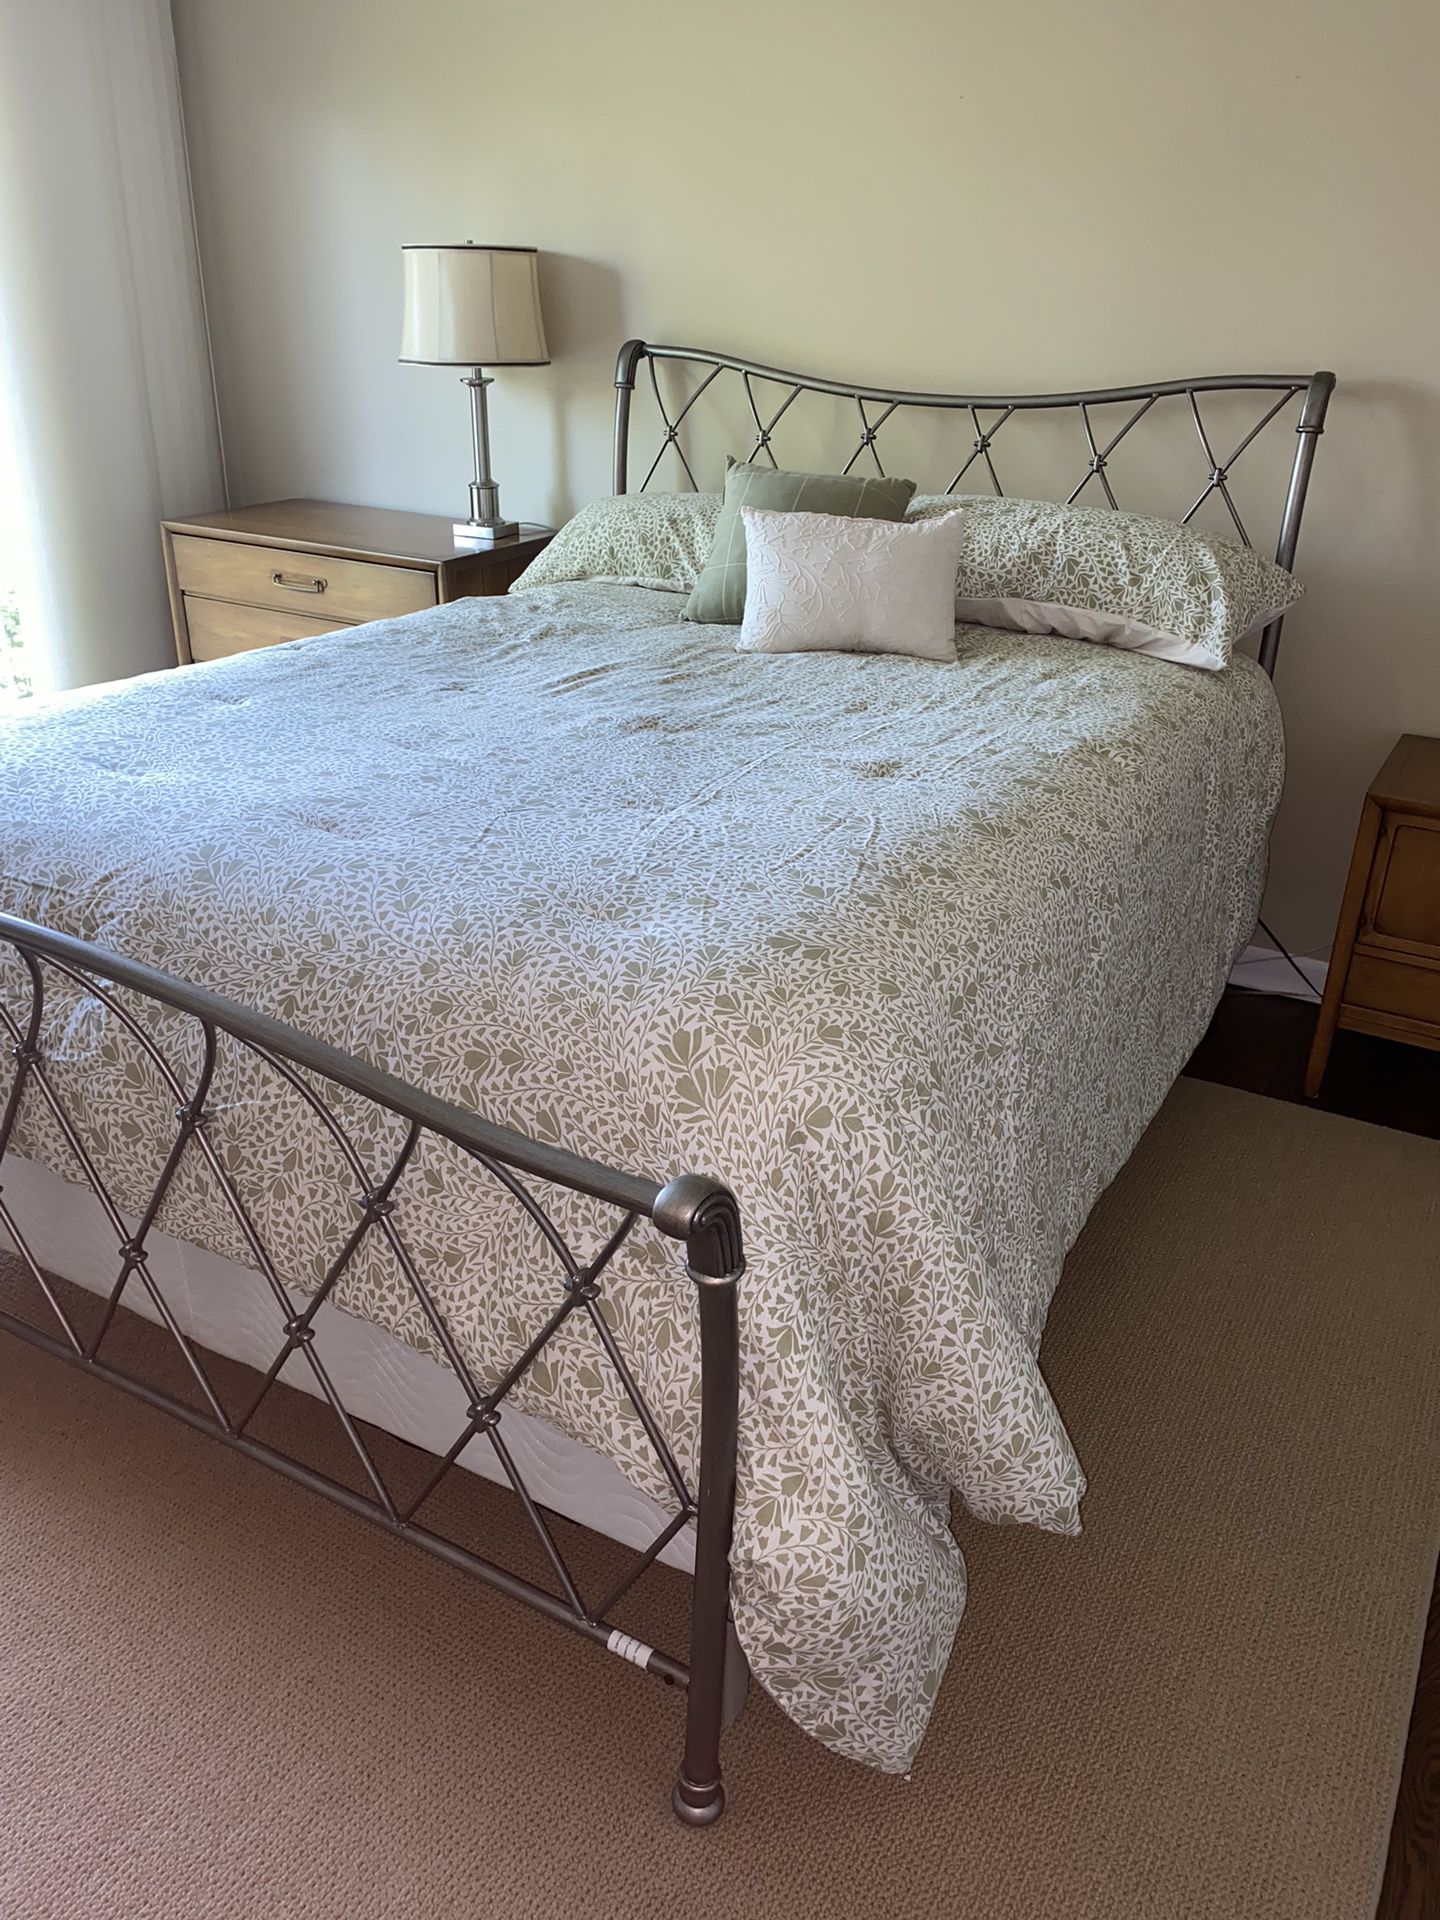 Queen bed frame with rails